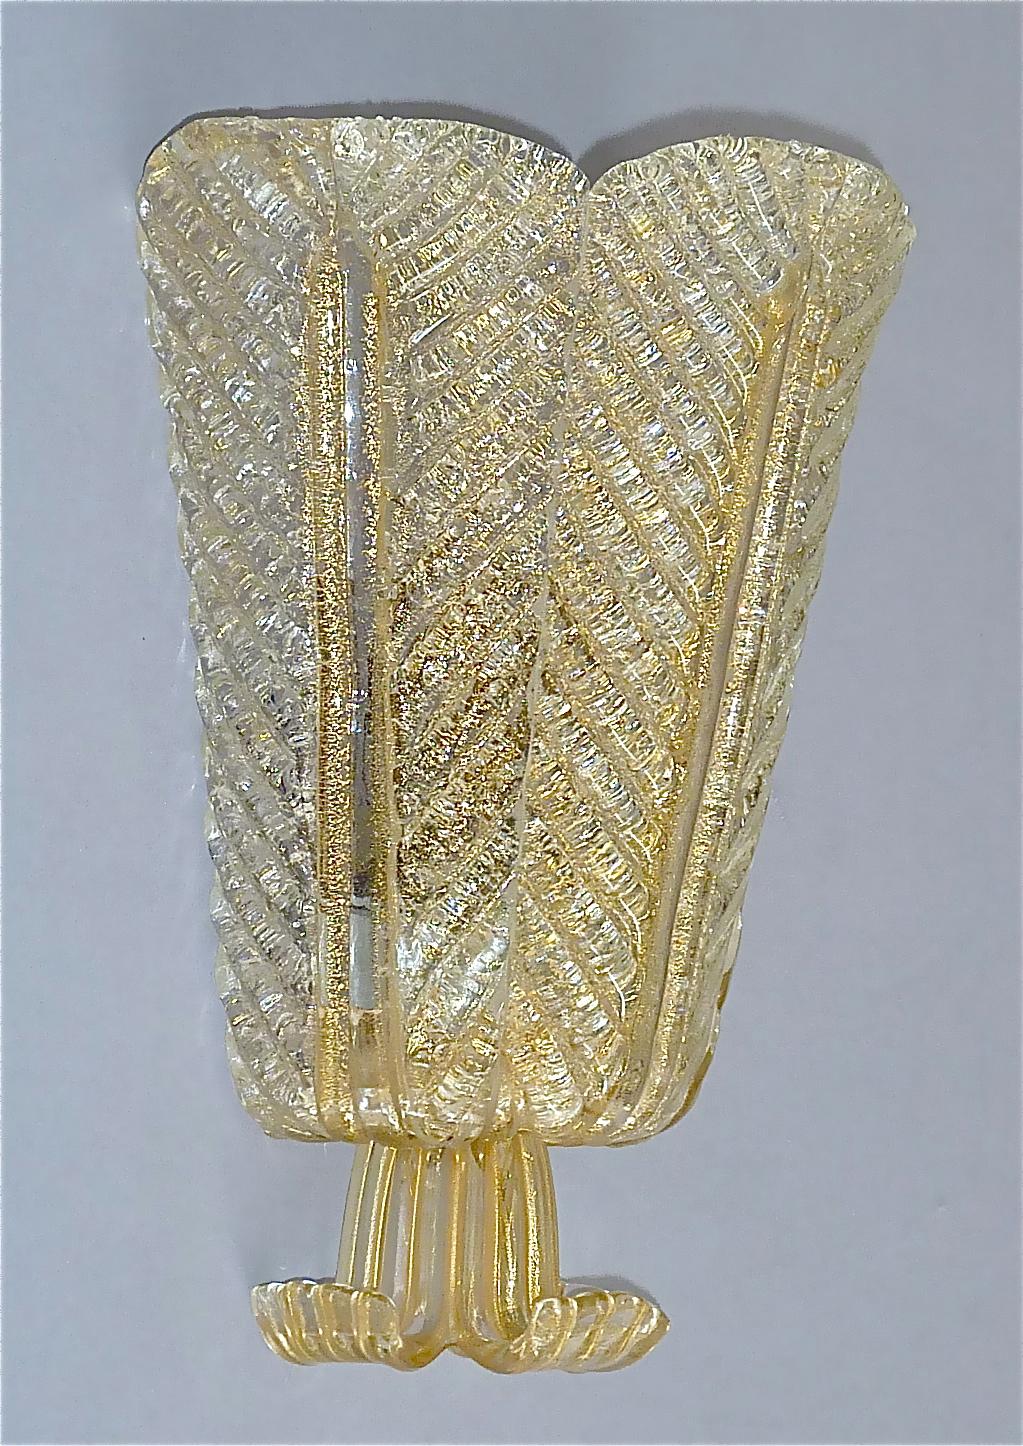 Rare Ercole Barovier Toso Flower Leaf Sconce Lamp Gold Murano Glass Art Deco For Sale 12